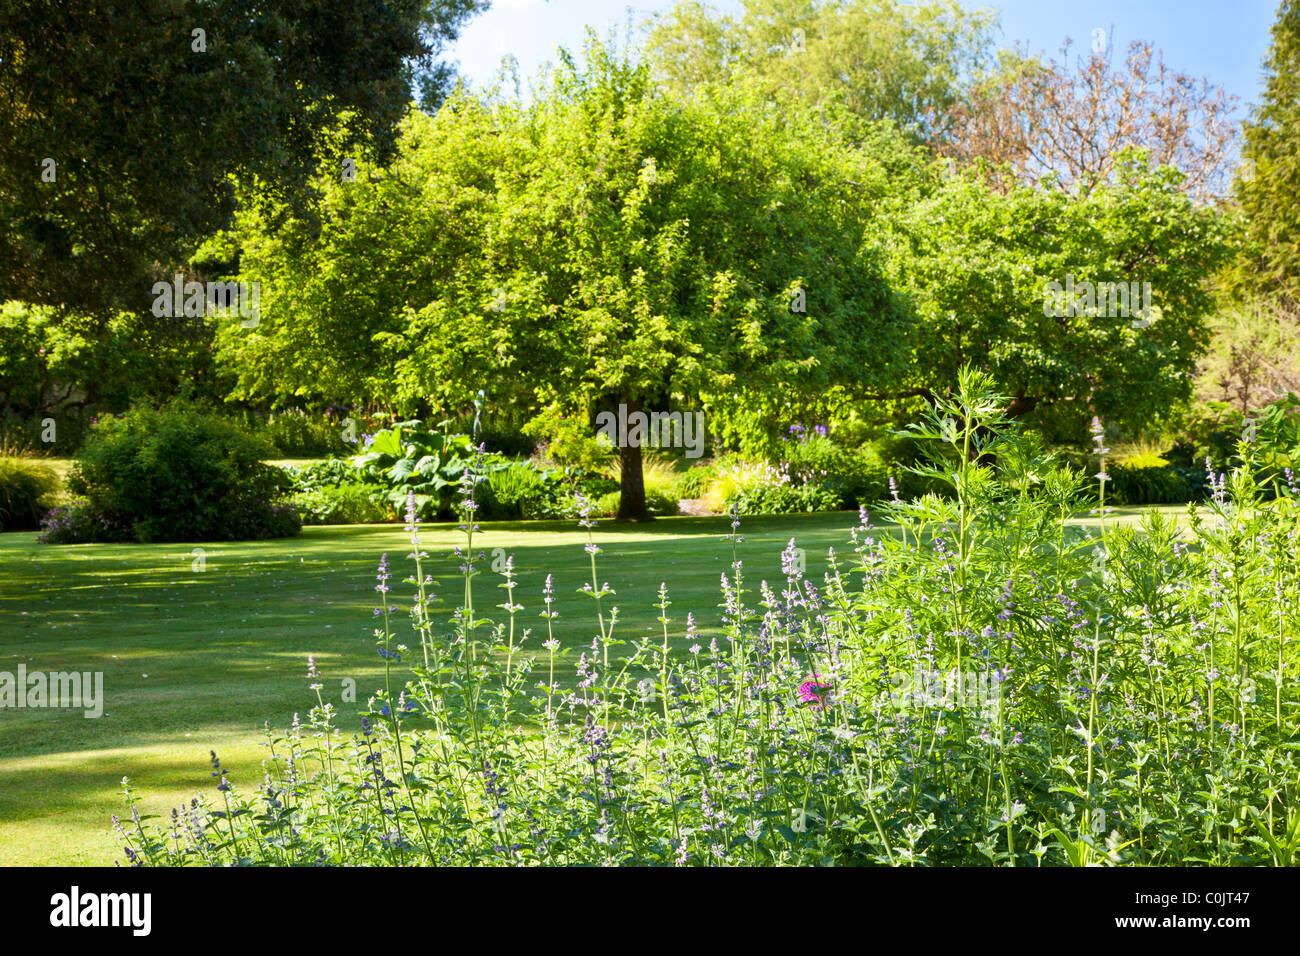 The lawn of an English country garden surrounded by trees, shrubs, flower beds and borders in Wiltshire, England, UK in summer Stock Photo